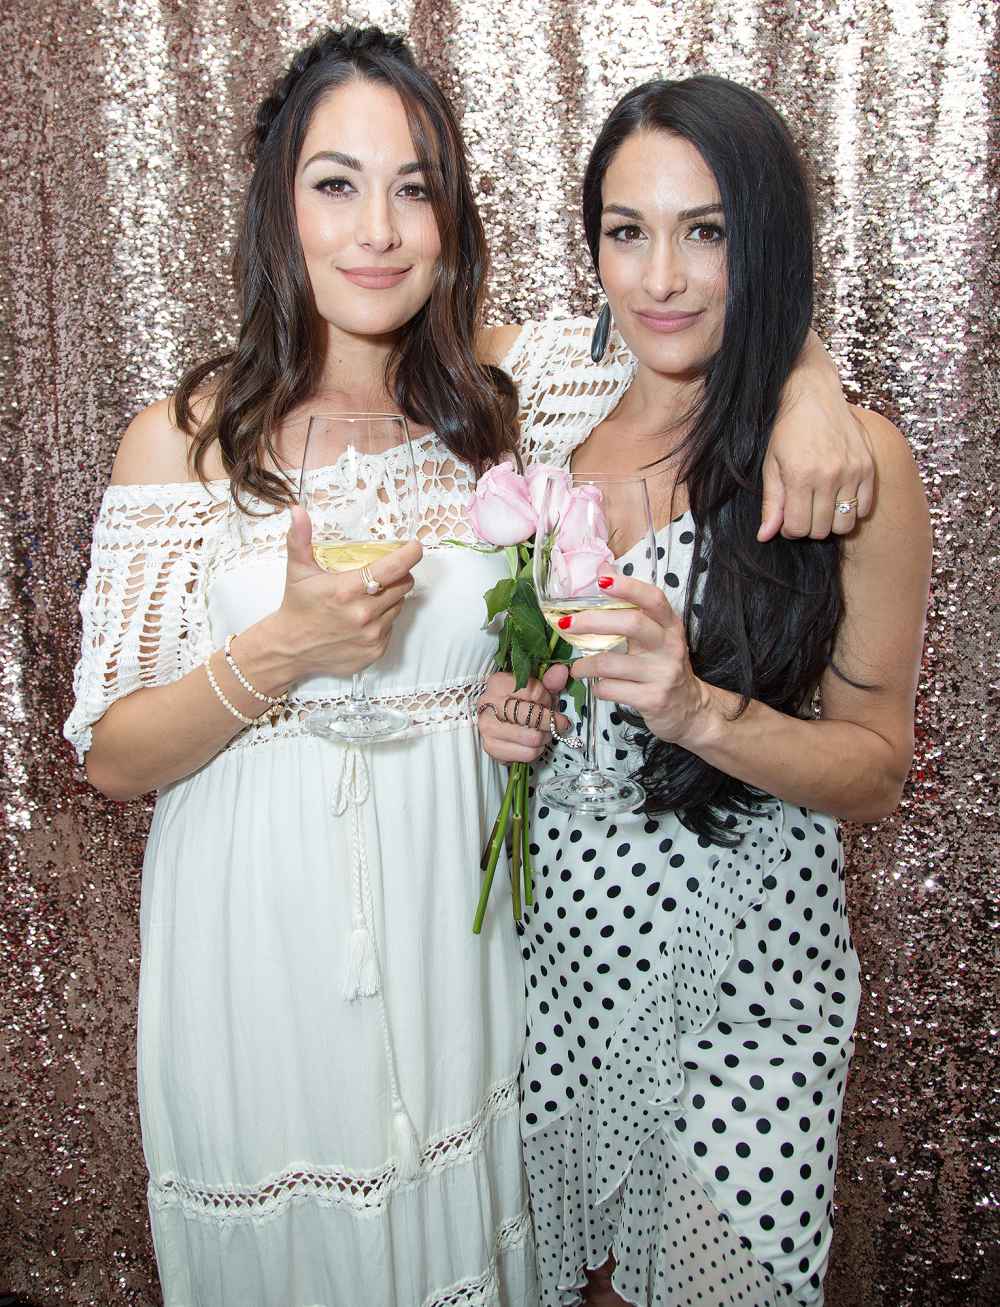 WWE Divas Brie Bella and Nikki Bella attend a photocall to promote